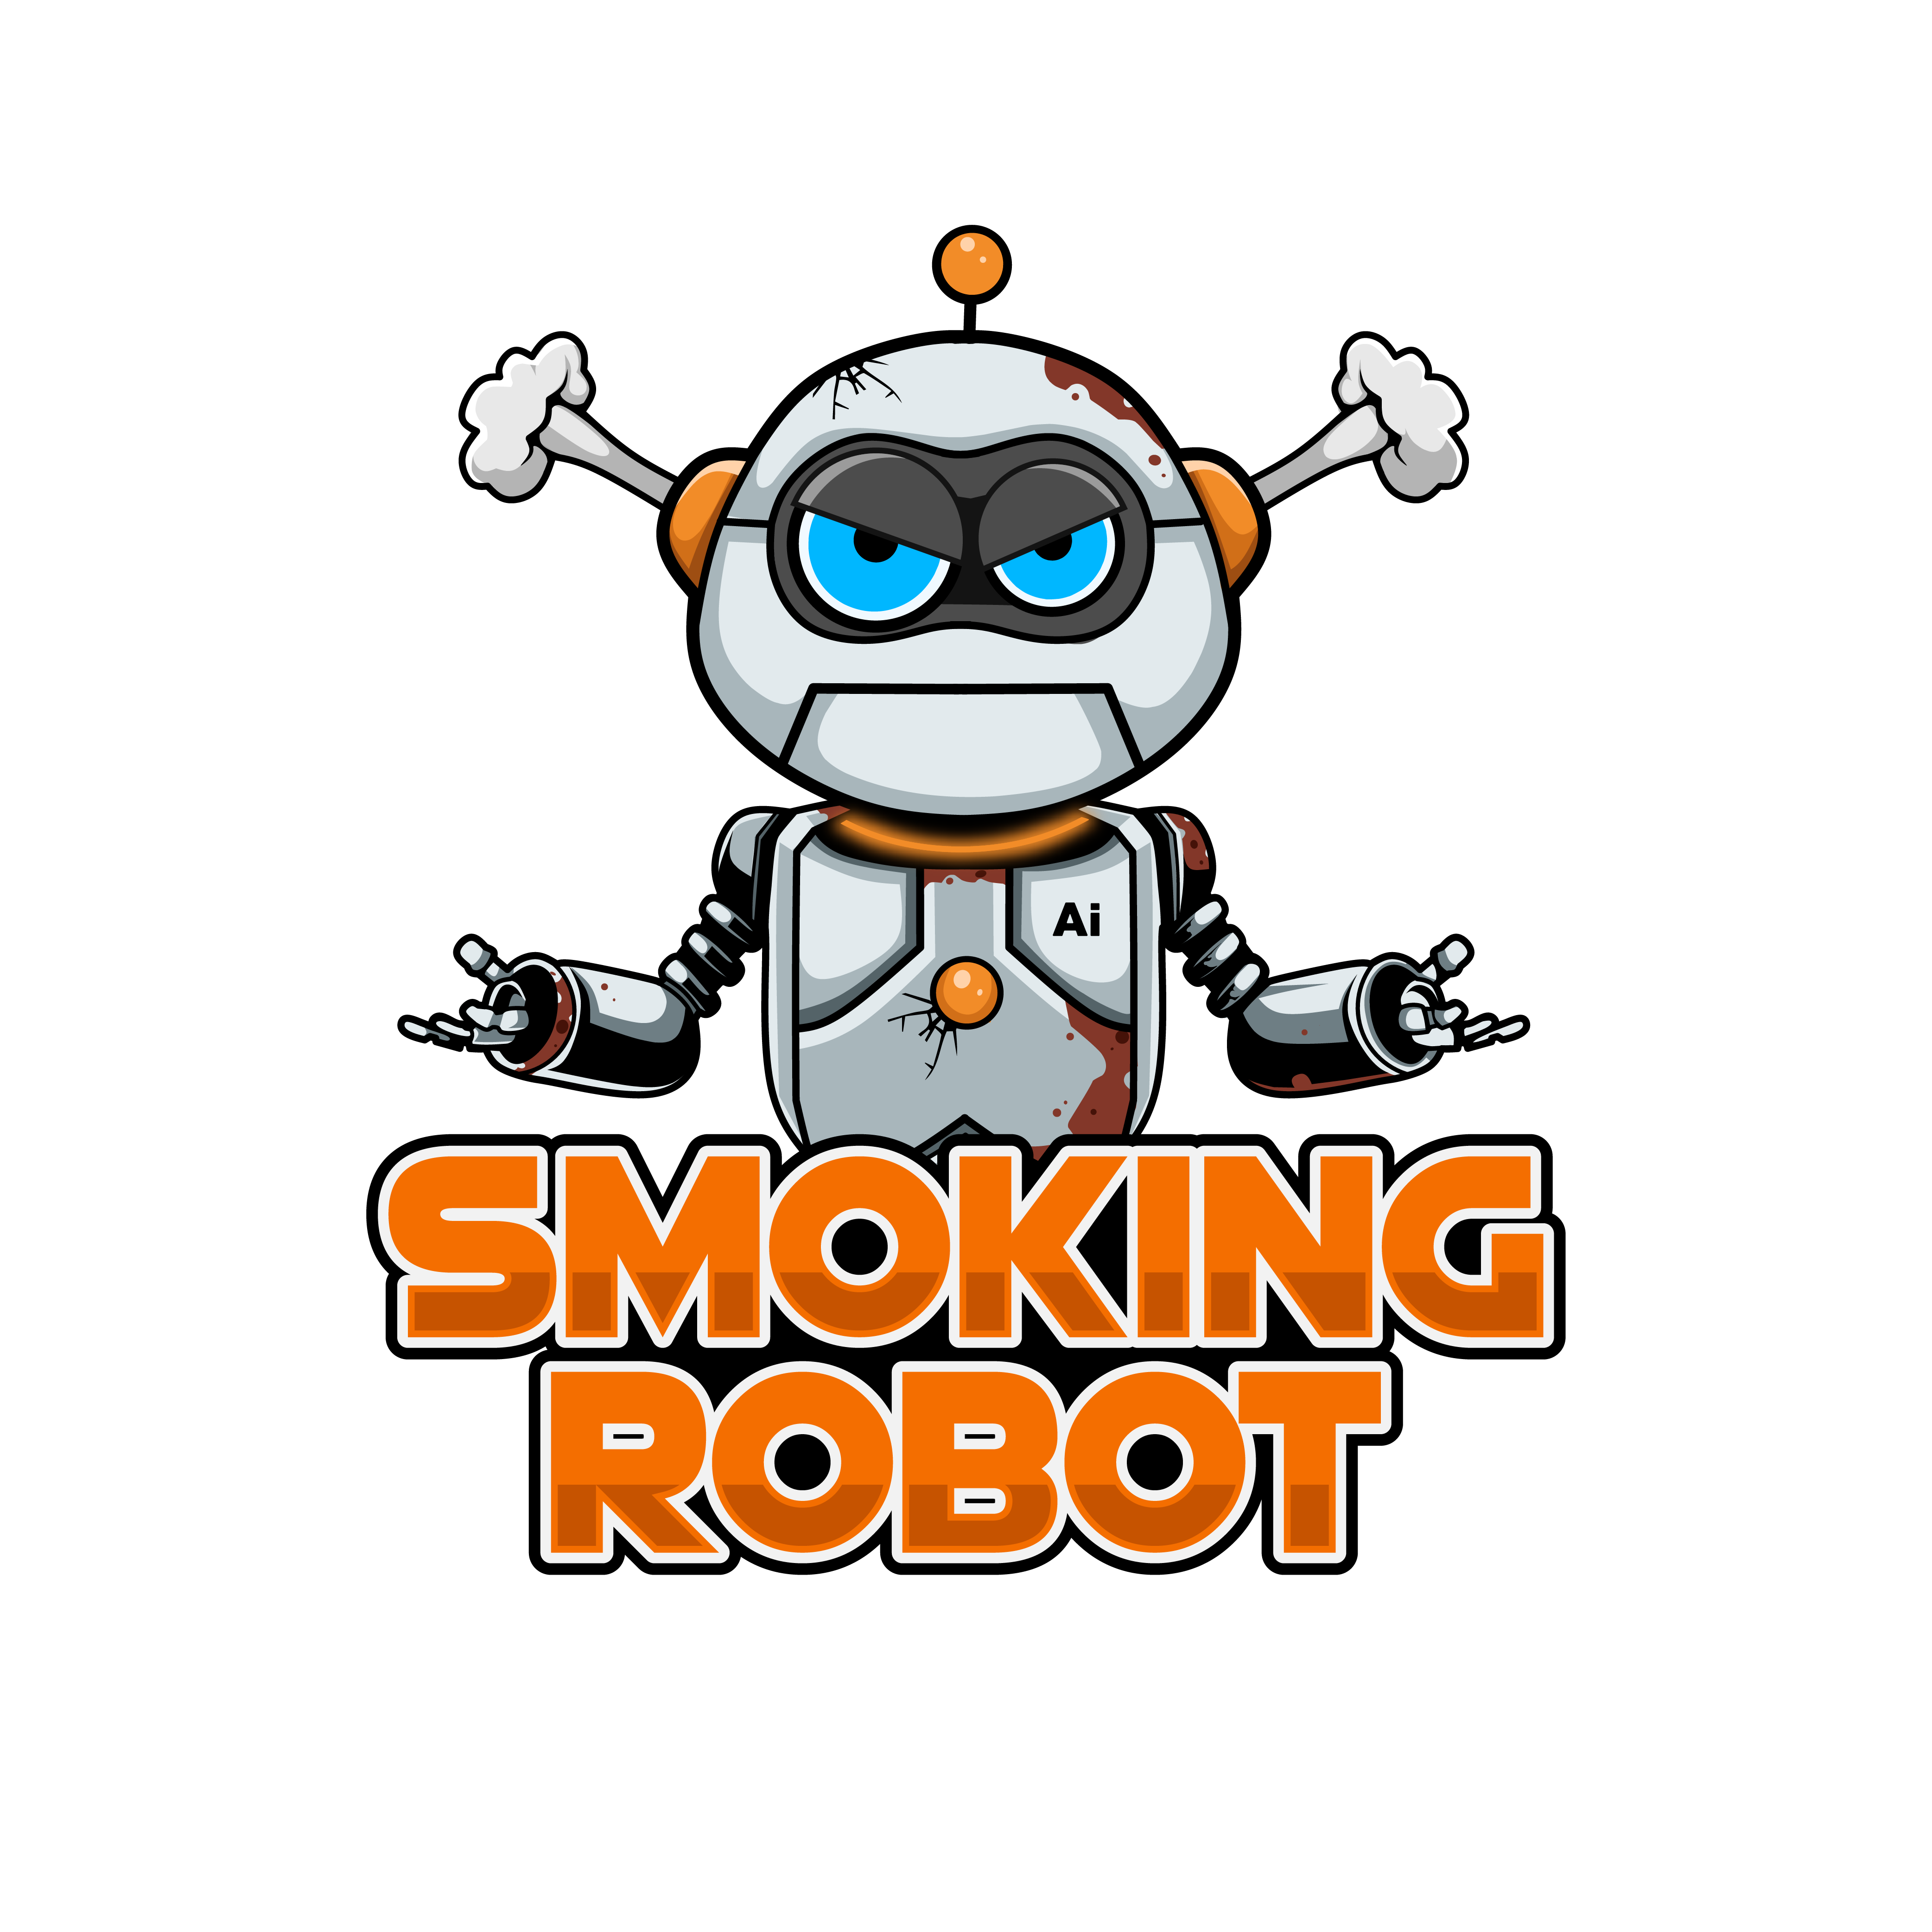 Smoking Robot AI - AI tool directory helps users find, review, and stay up to date on the latest AI tools